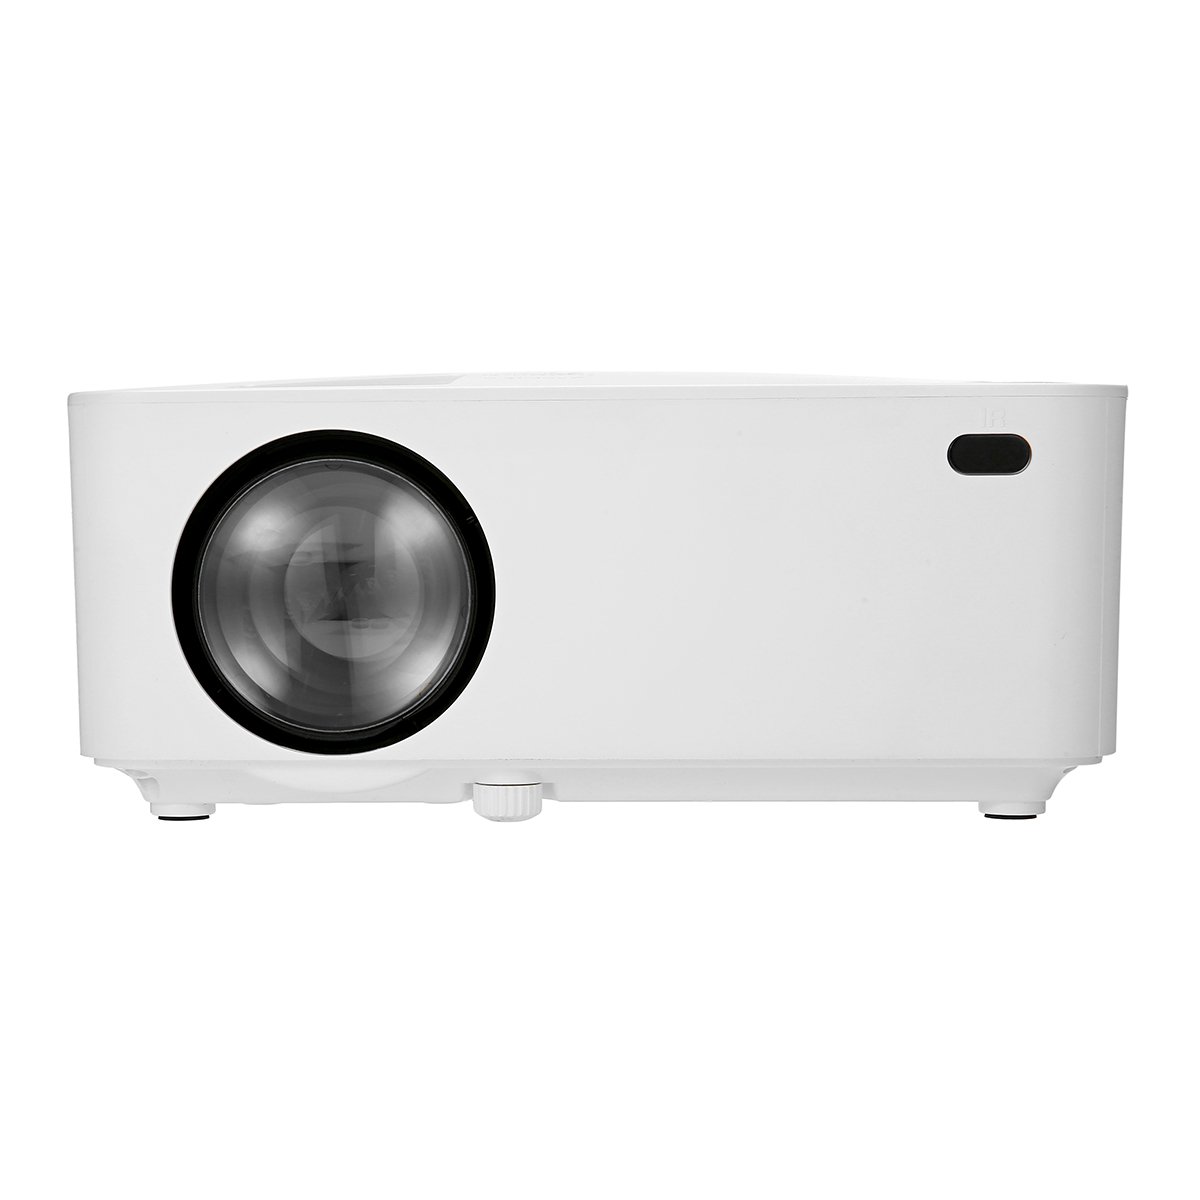 New Version Mini Projector 176" Display 1080P Full HD LCD Movie Projector, 50,000 Hours Lamp Life Home Theater Video Projector with HDMI/AV Cable and 2